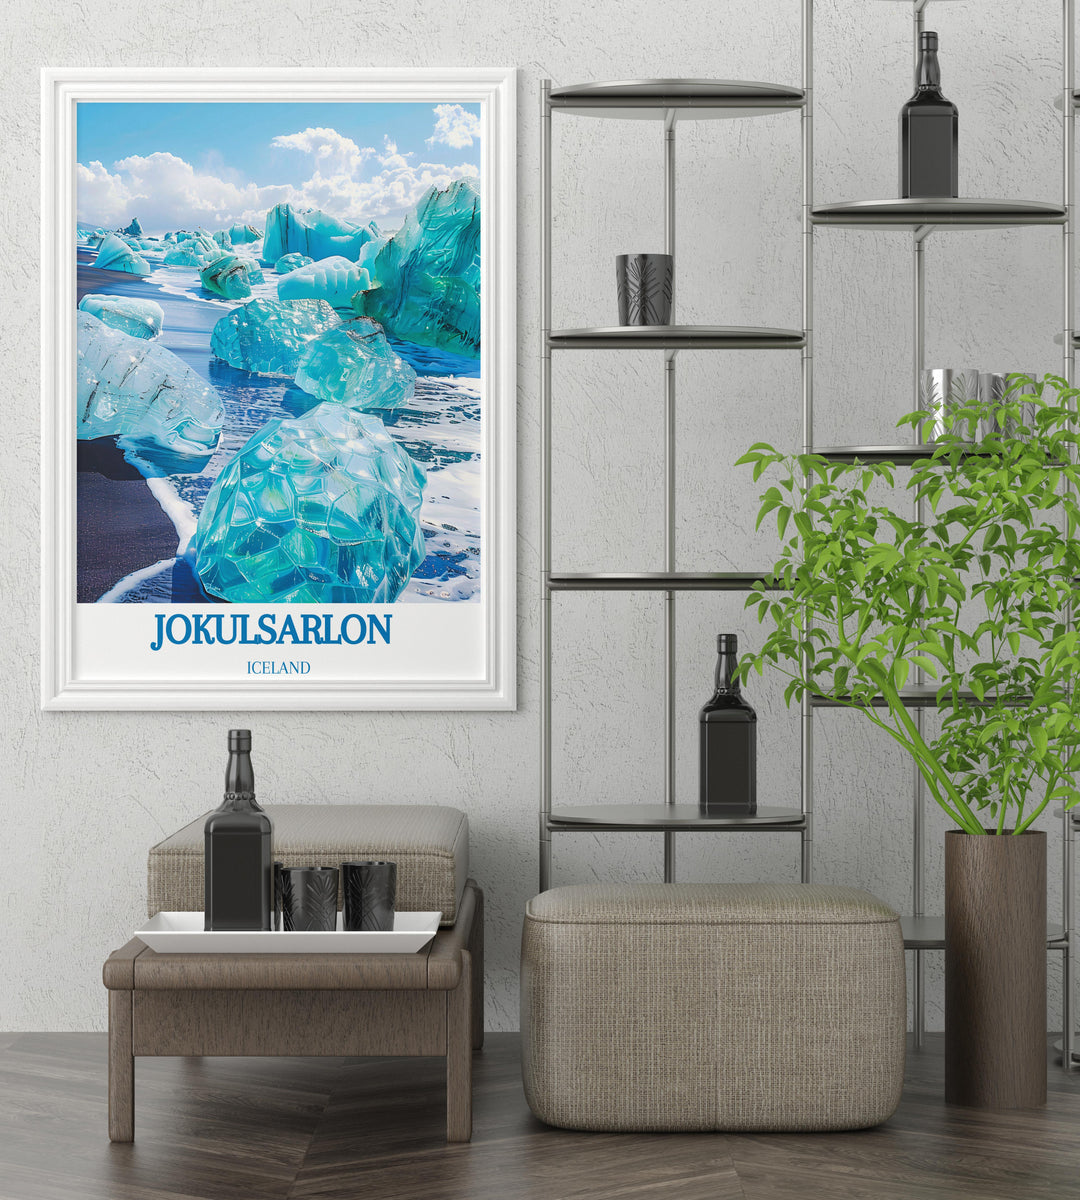 Canvas art of Iceberg Lagoon in Jokulsarlon capturing the majestic ice formations ideal for offices or study areas